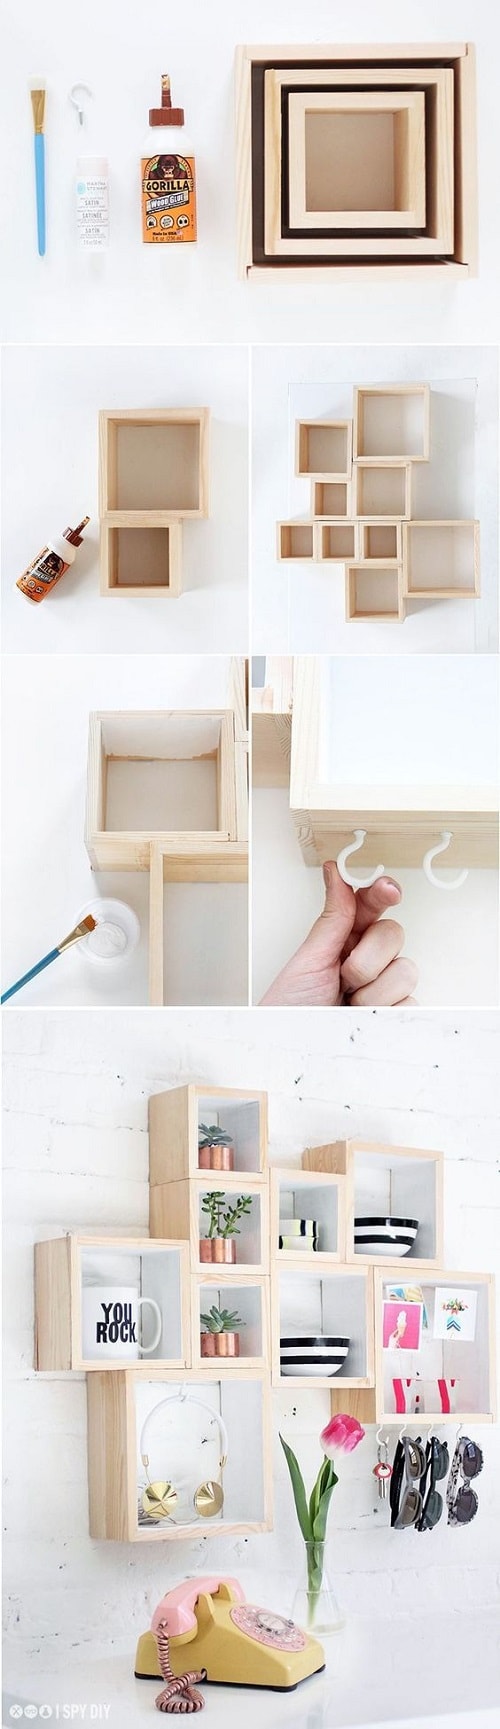 20+ Clever Chic DIY Small Bedroom Storage Hacks That'll ...